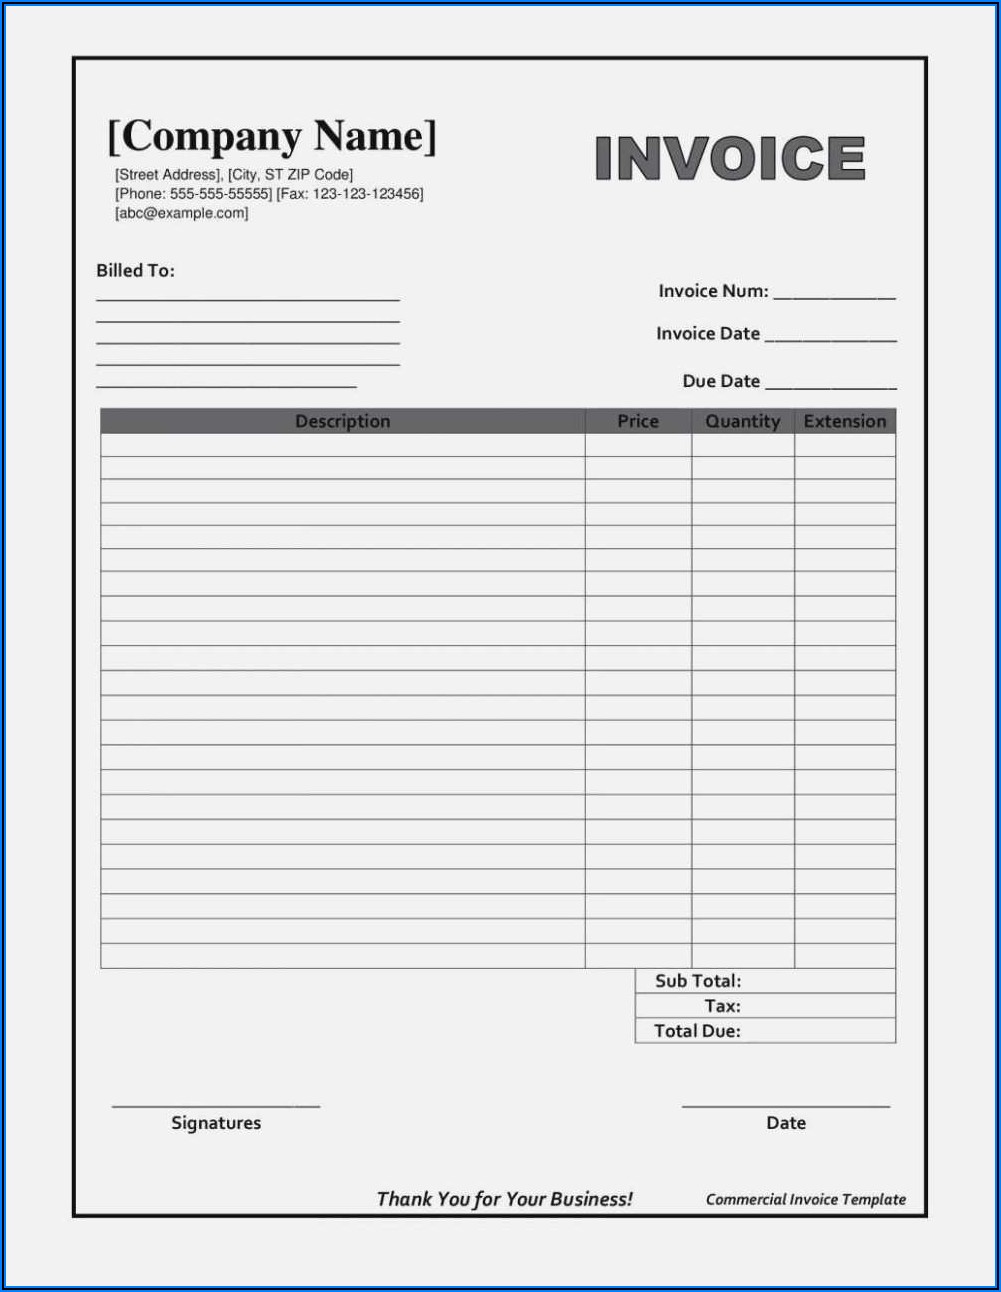 Copy Invoice Template From One Quickbooks Company To Another